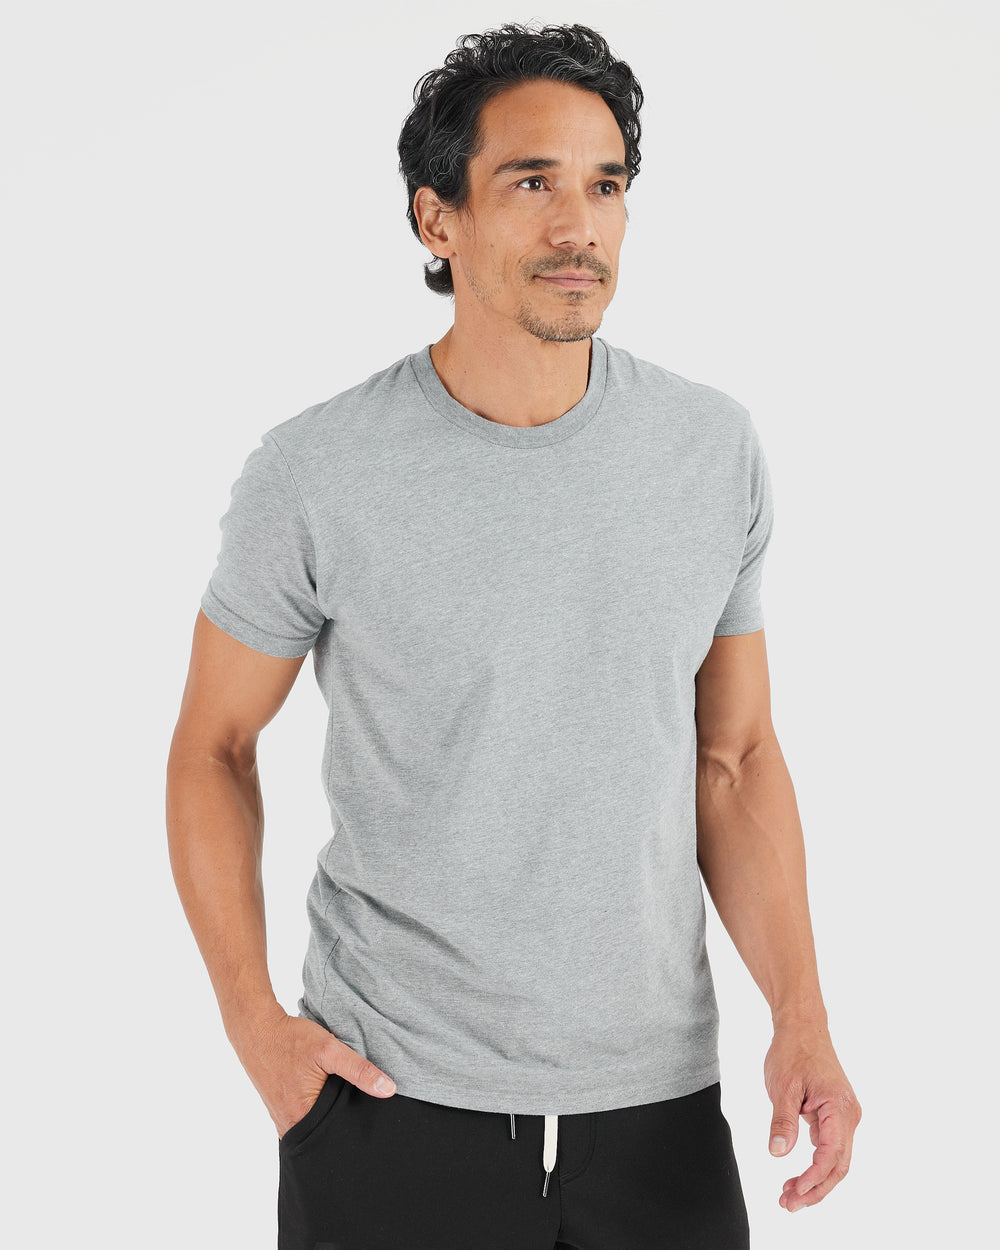 All Heather Gray Classic Crew Neck Short Sleeve T-Shirt 5-Pack